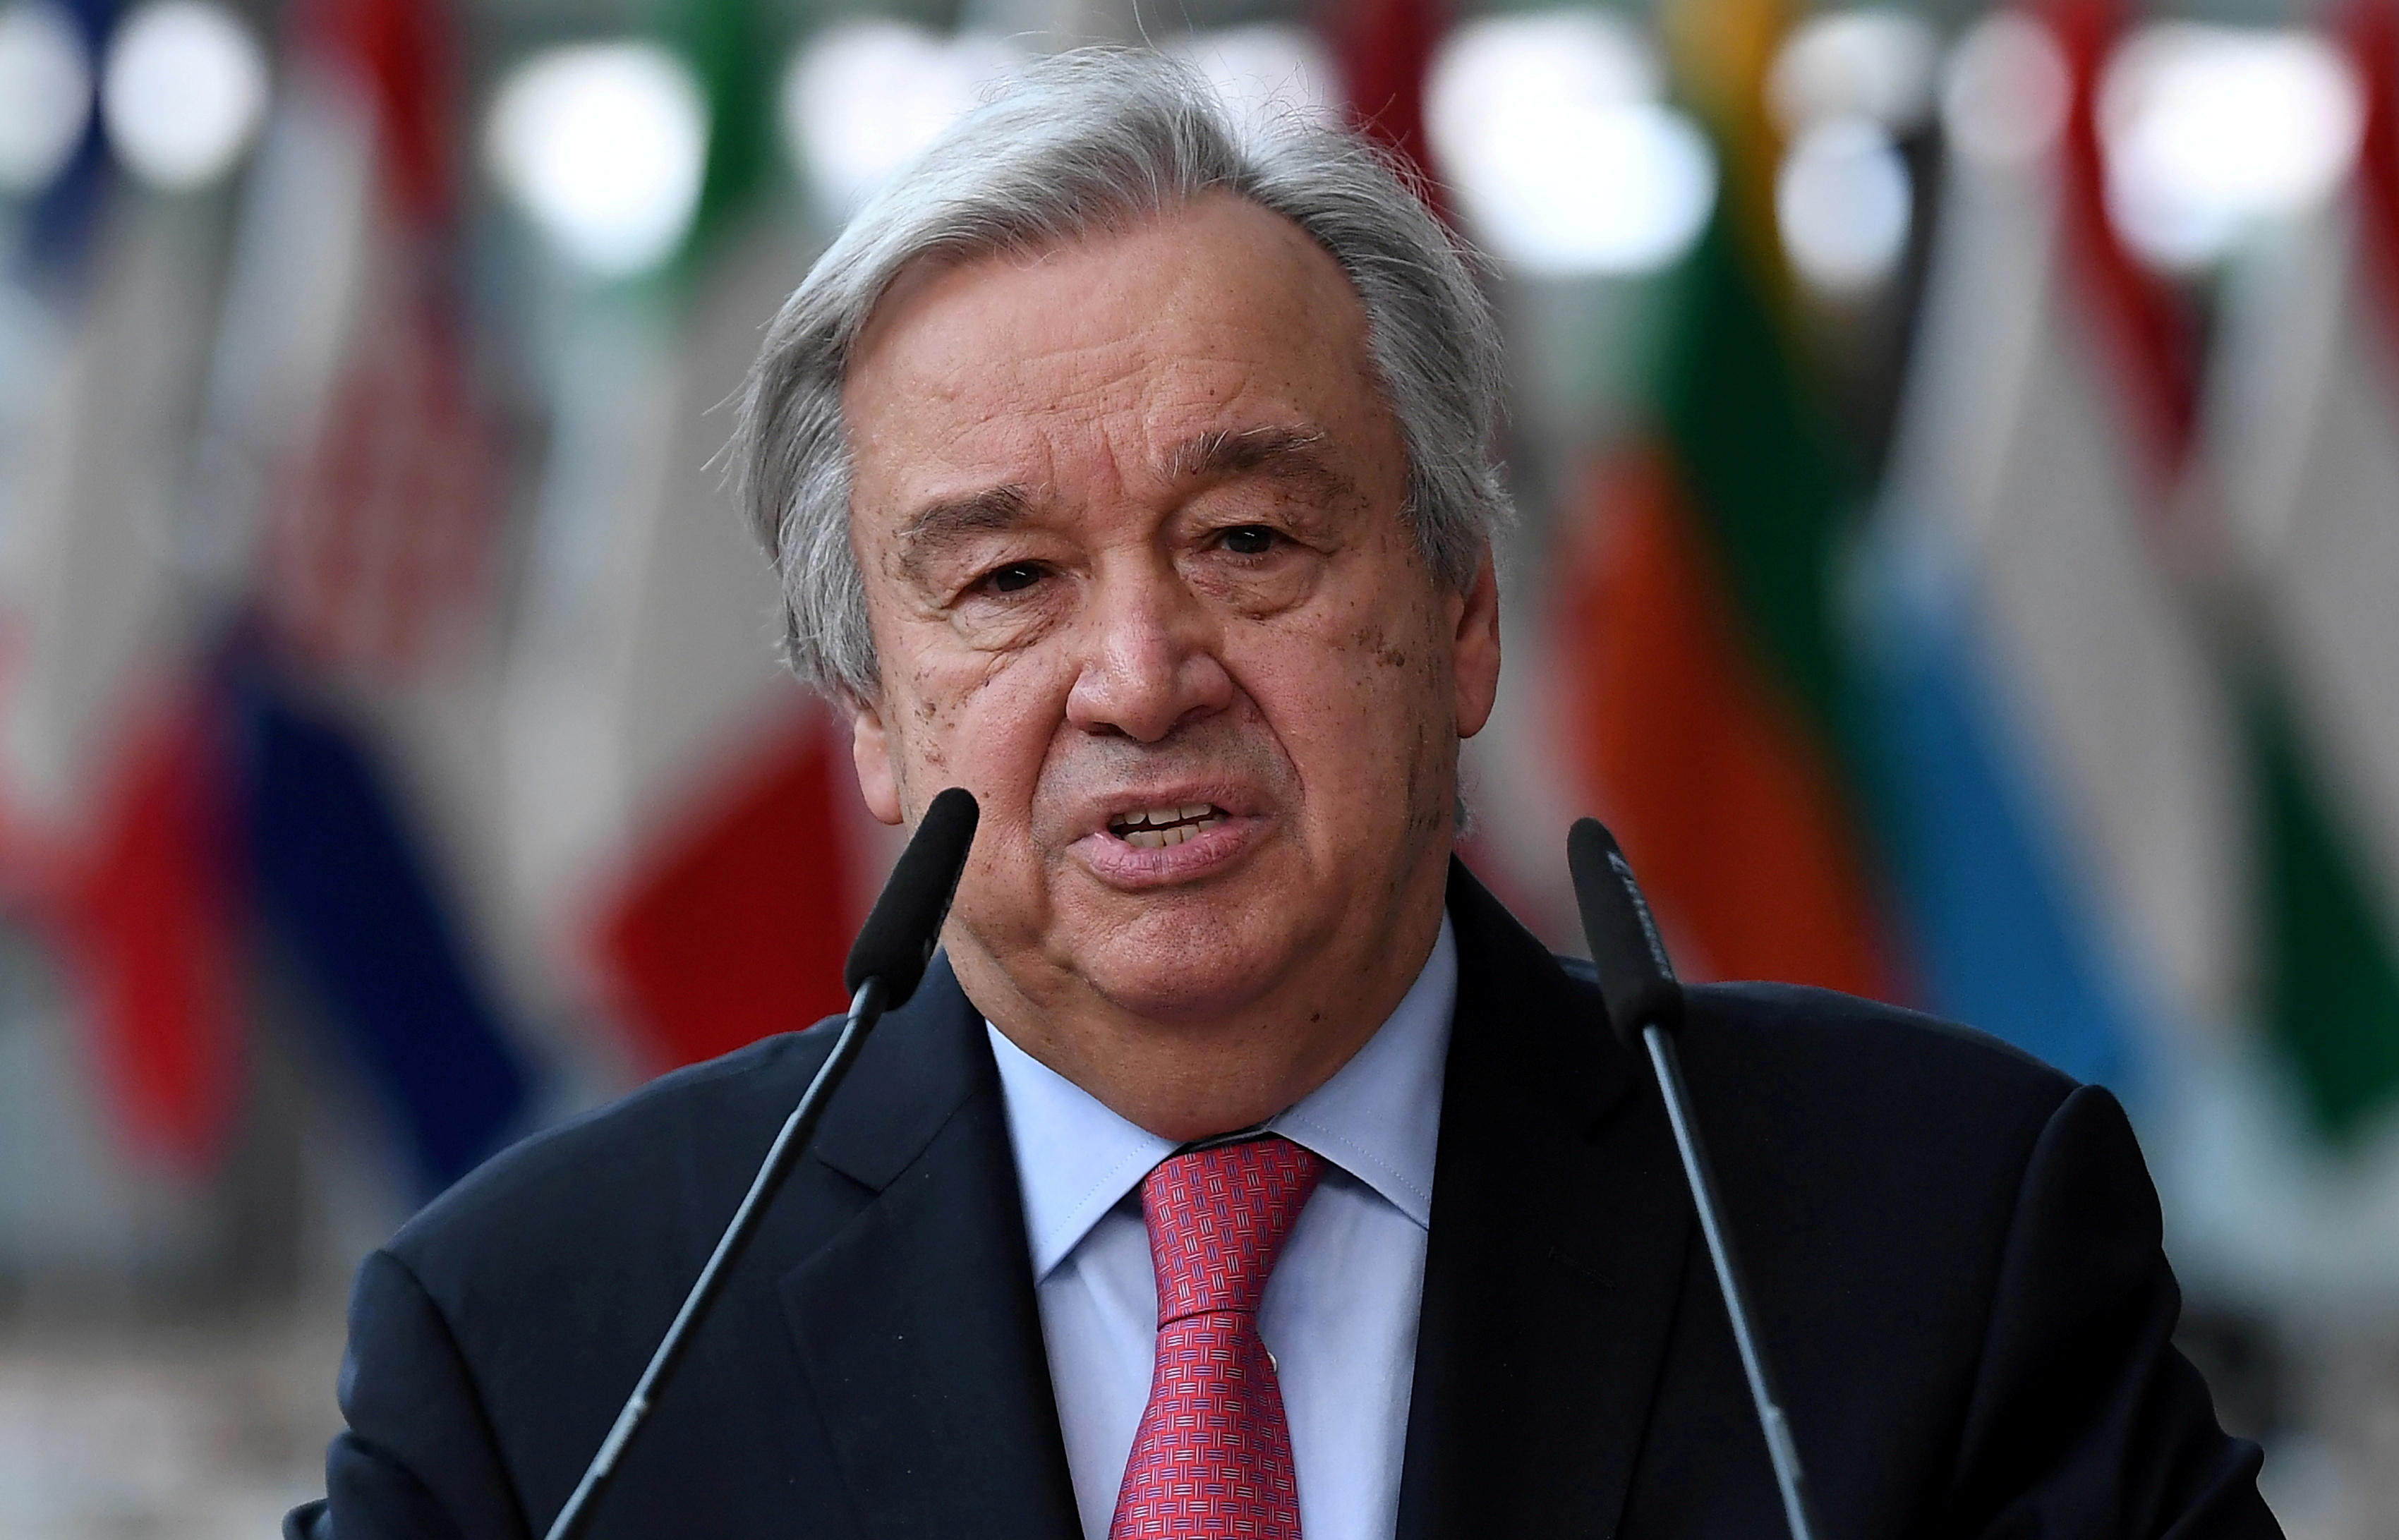 Secretary-General of the United Nations Antonio Guterres addresses the media as he arrives on the first day of the European Union summit at The European Council Building in Brussels, Belgium June 24, 2021. John Thys/Pool via REUTERS